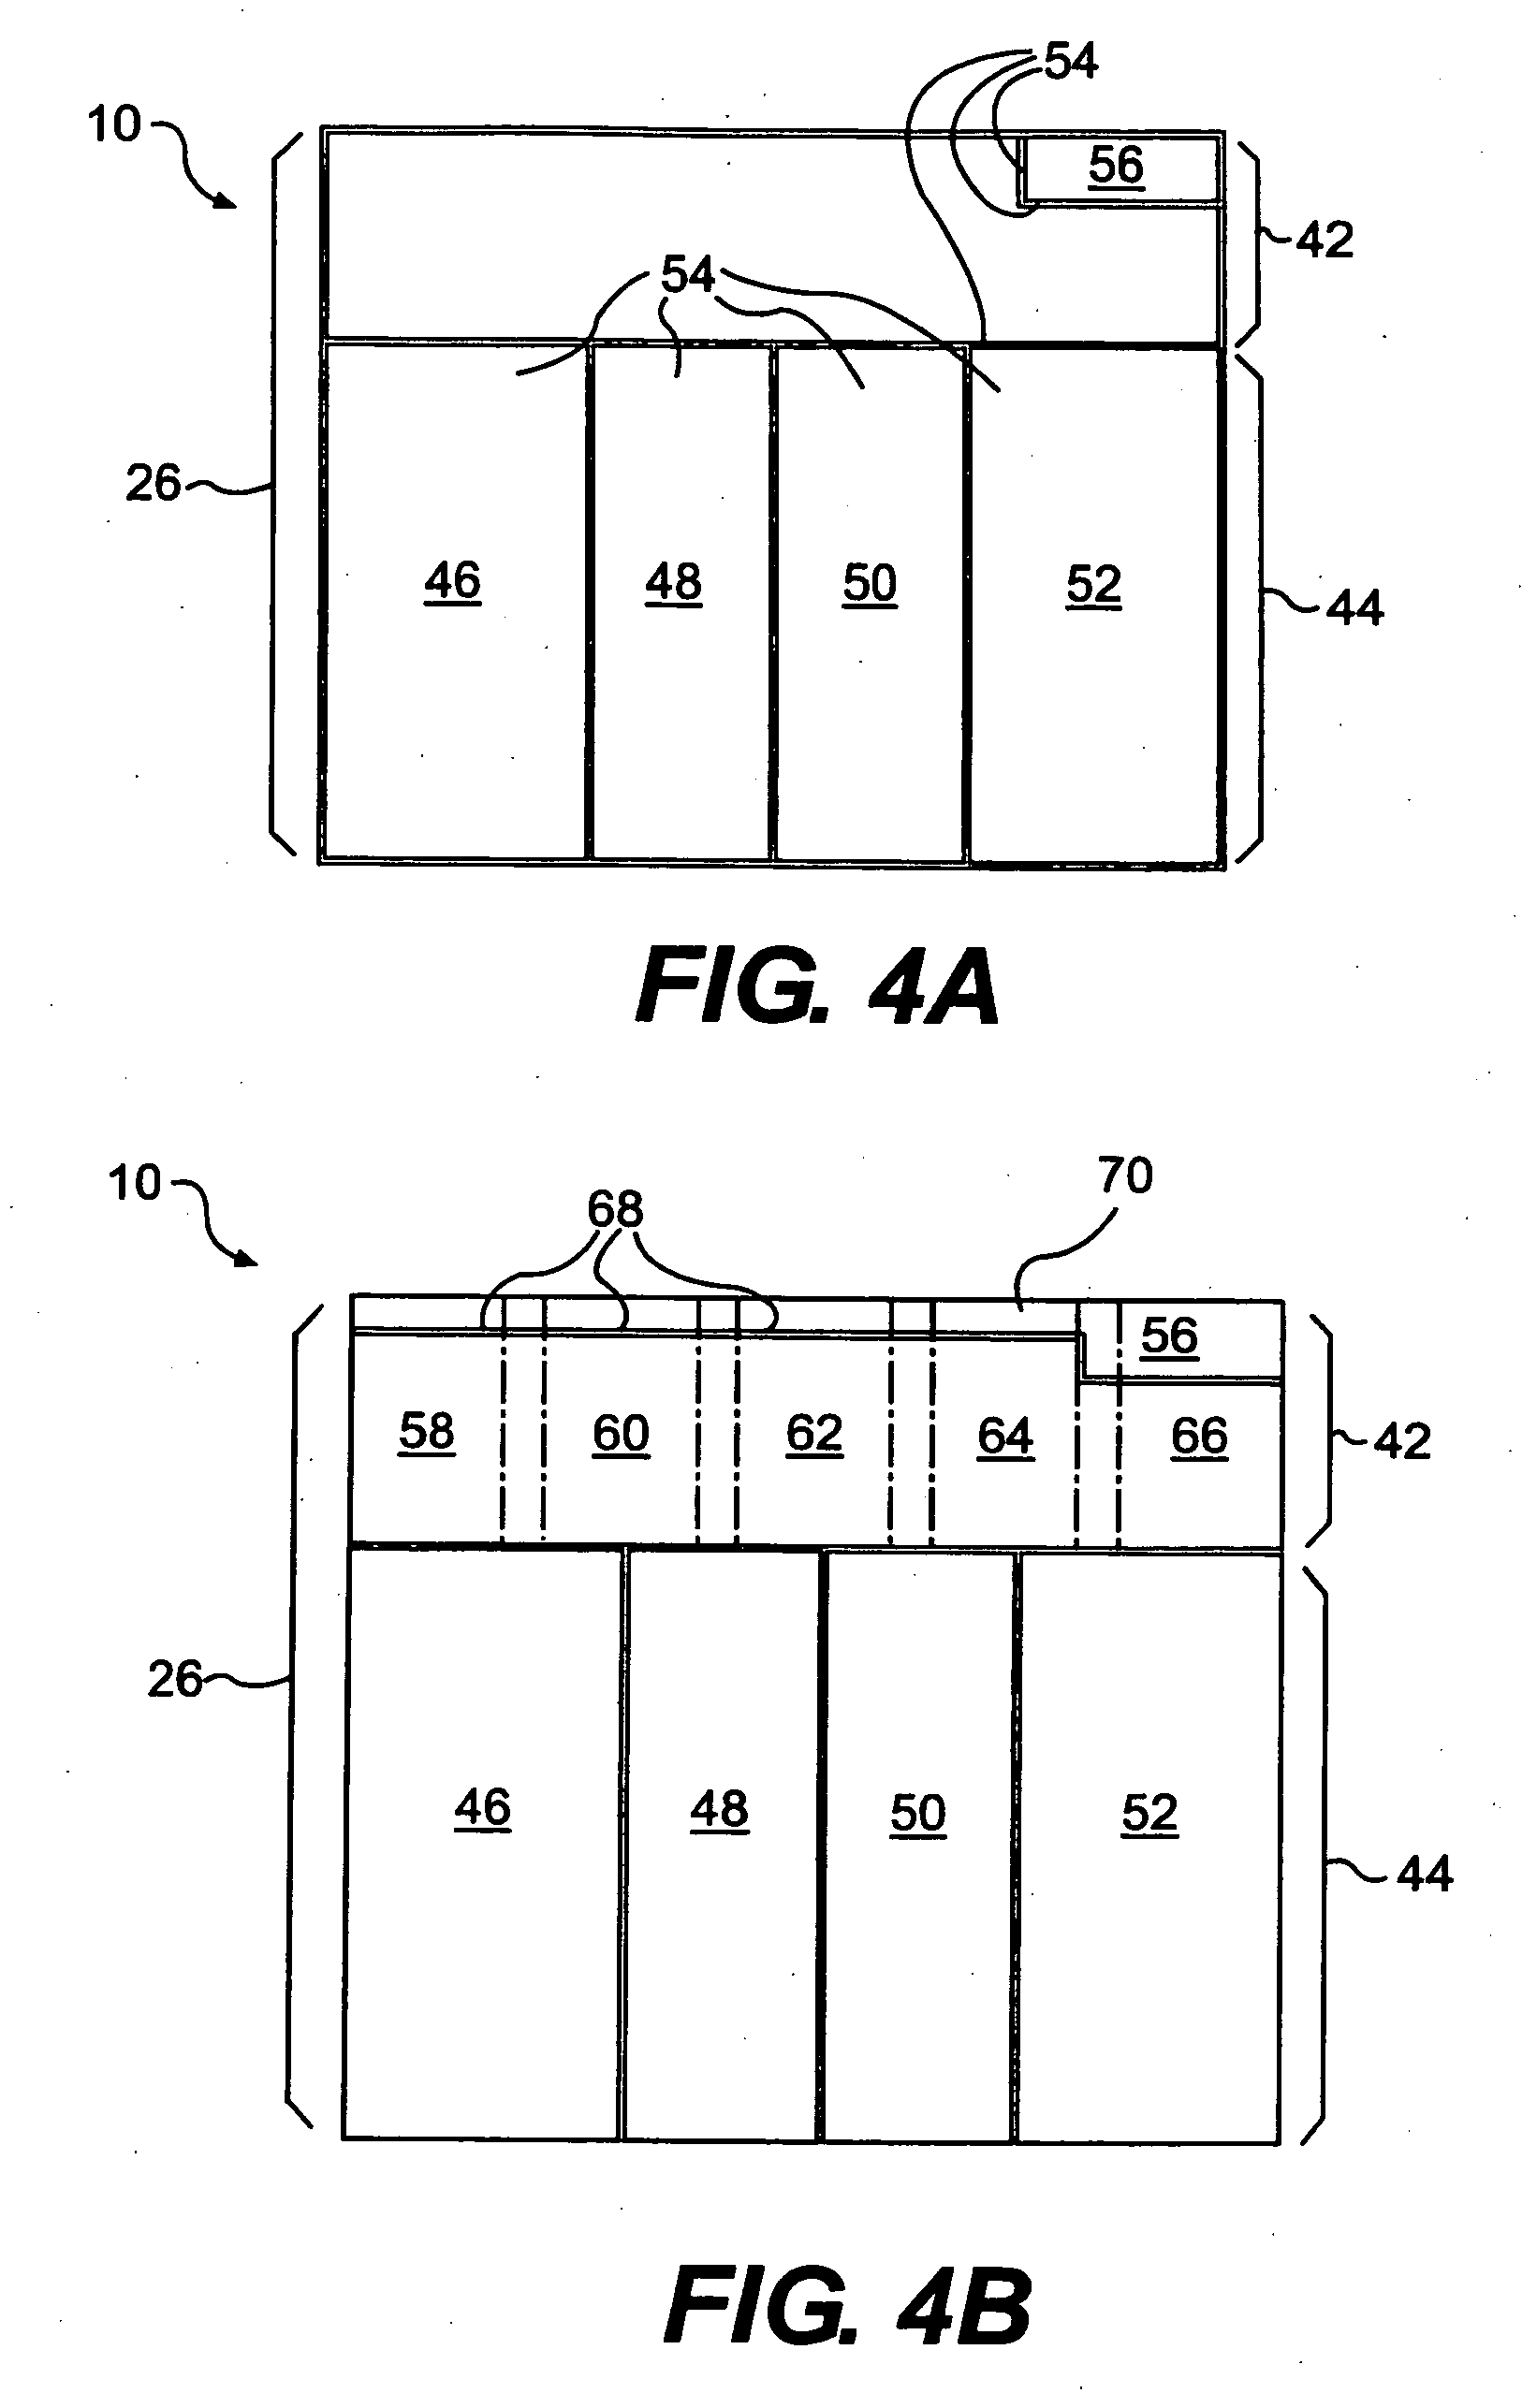 Diagnostic strip coding system and related methods of use